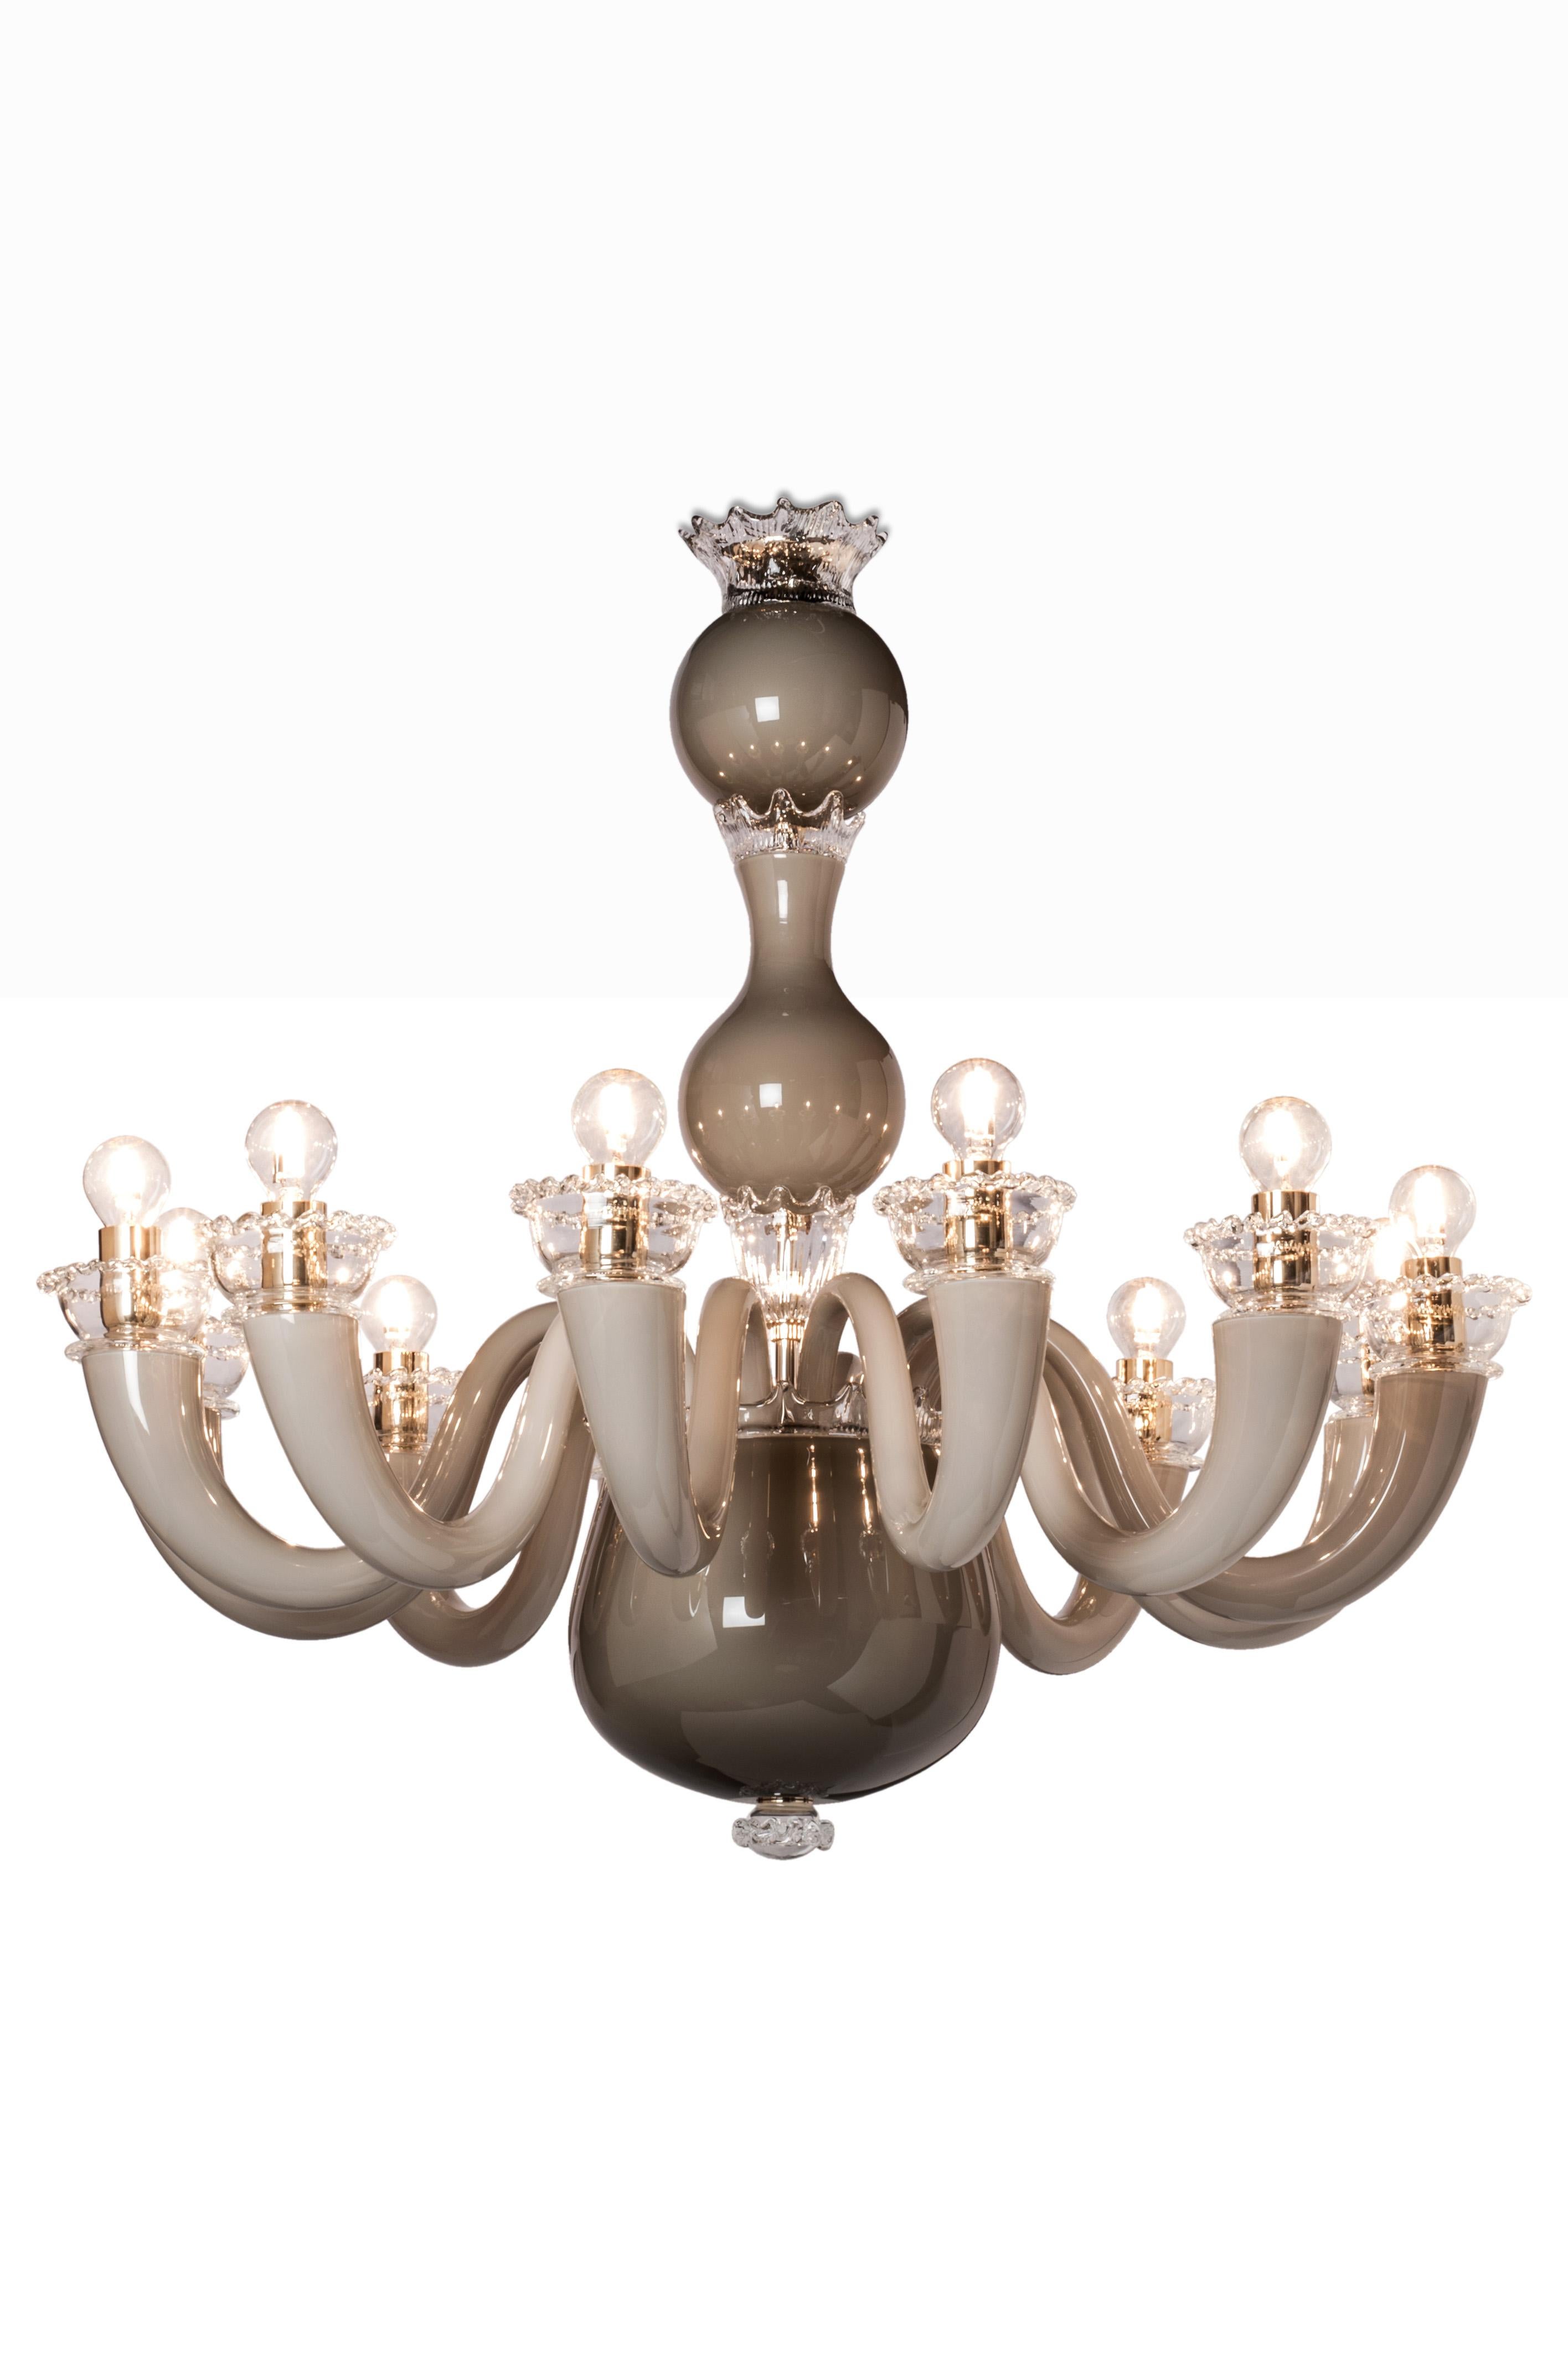 Glass chandelier with gold-plated metal finishes and chain. An understated and elegant chandelier option particularly suitable to an entrance or living room environment. Also available in various sizes and colors. 

Light source: 12 x max 60 W E